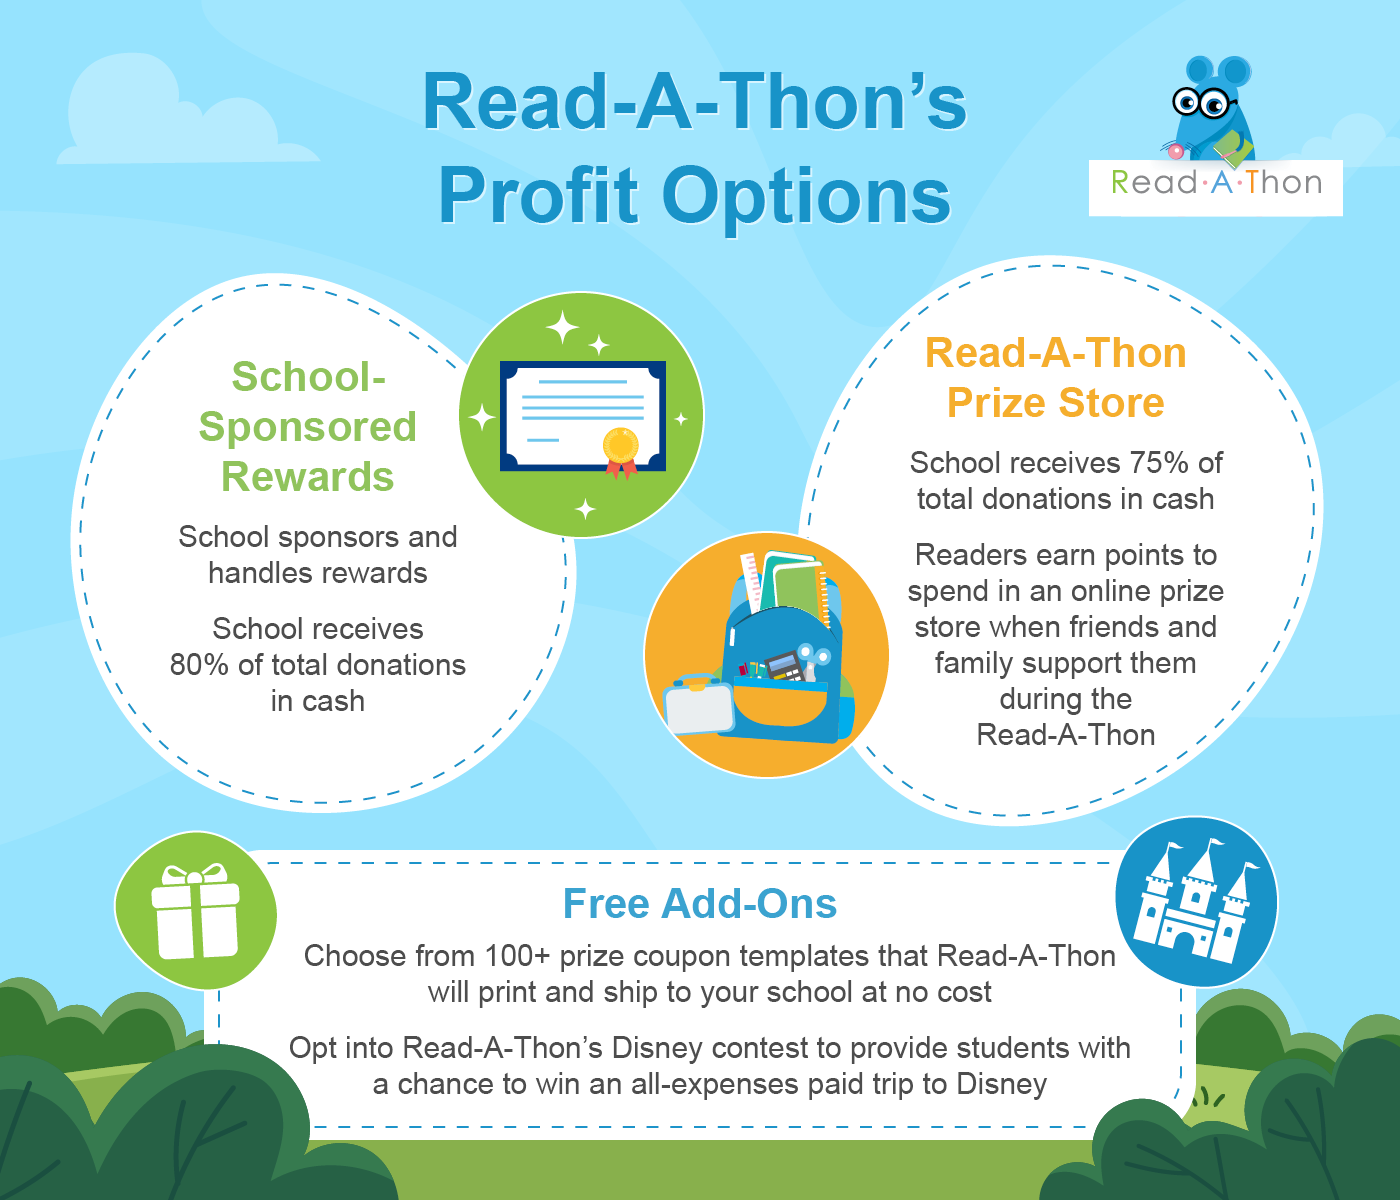 The two Read-A-Thon profit options you can choose from, depending on how you want to handle school fundraising prizes and student engagement.